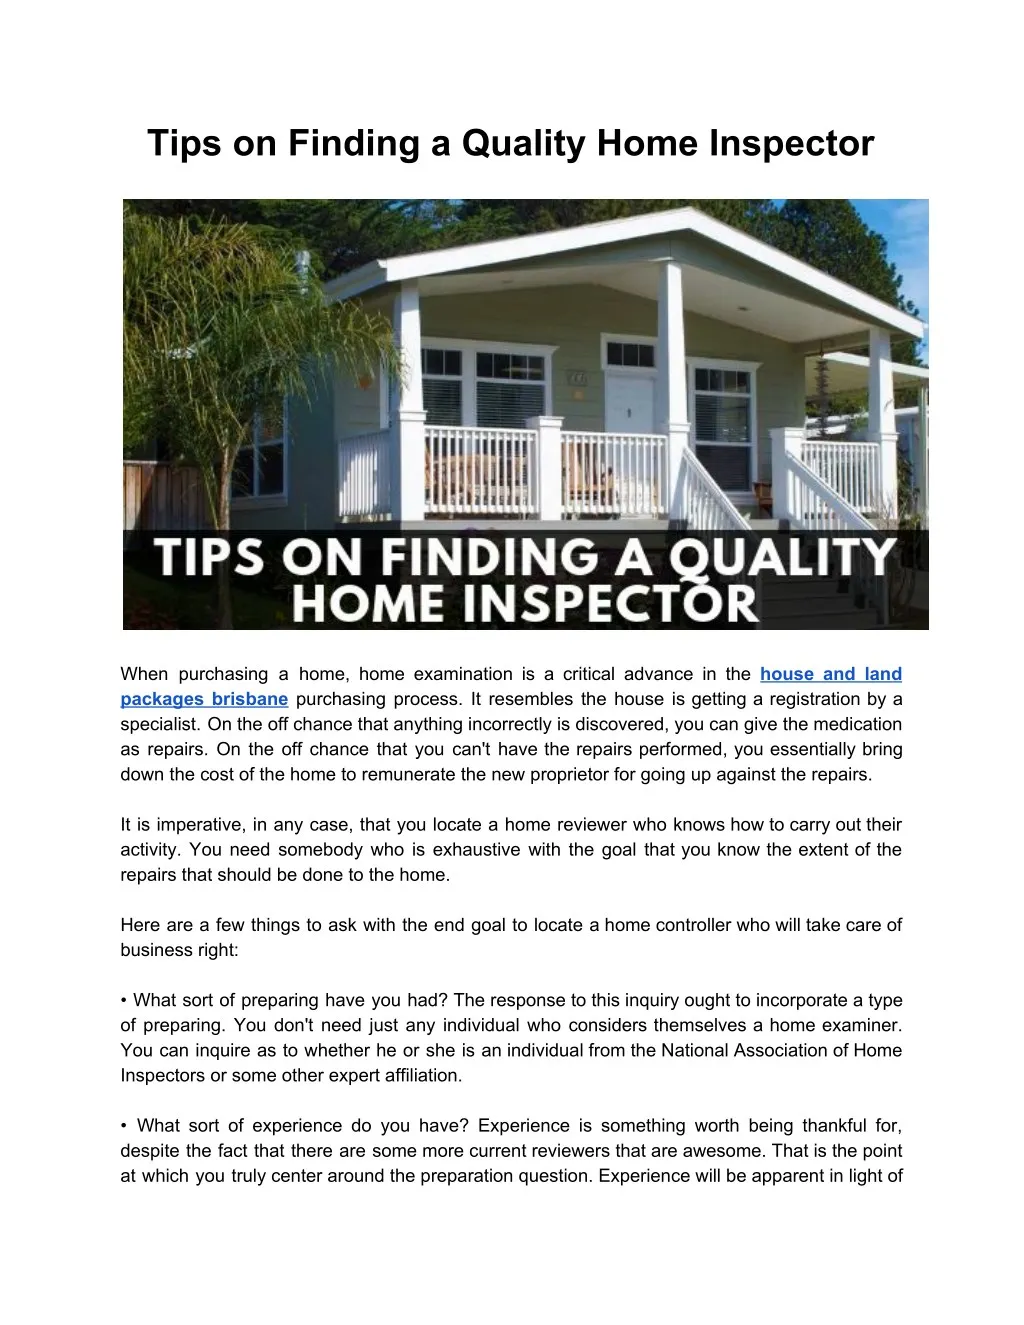 tips on finding a quality home inspector